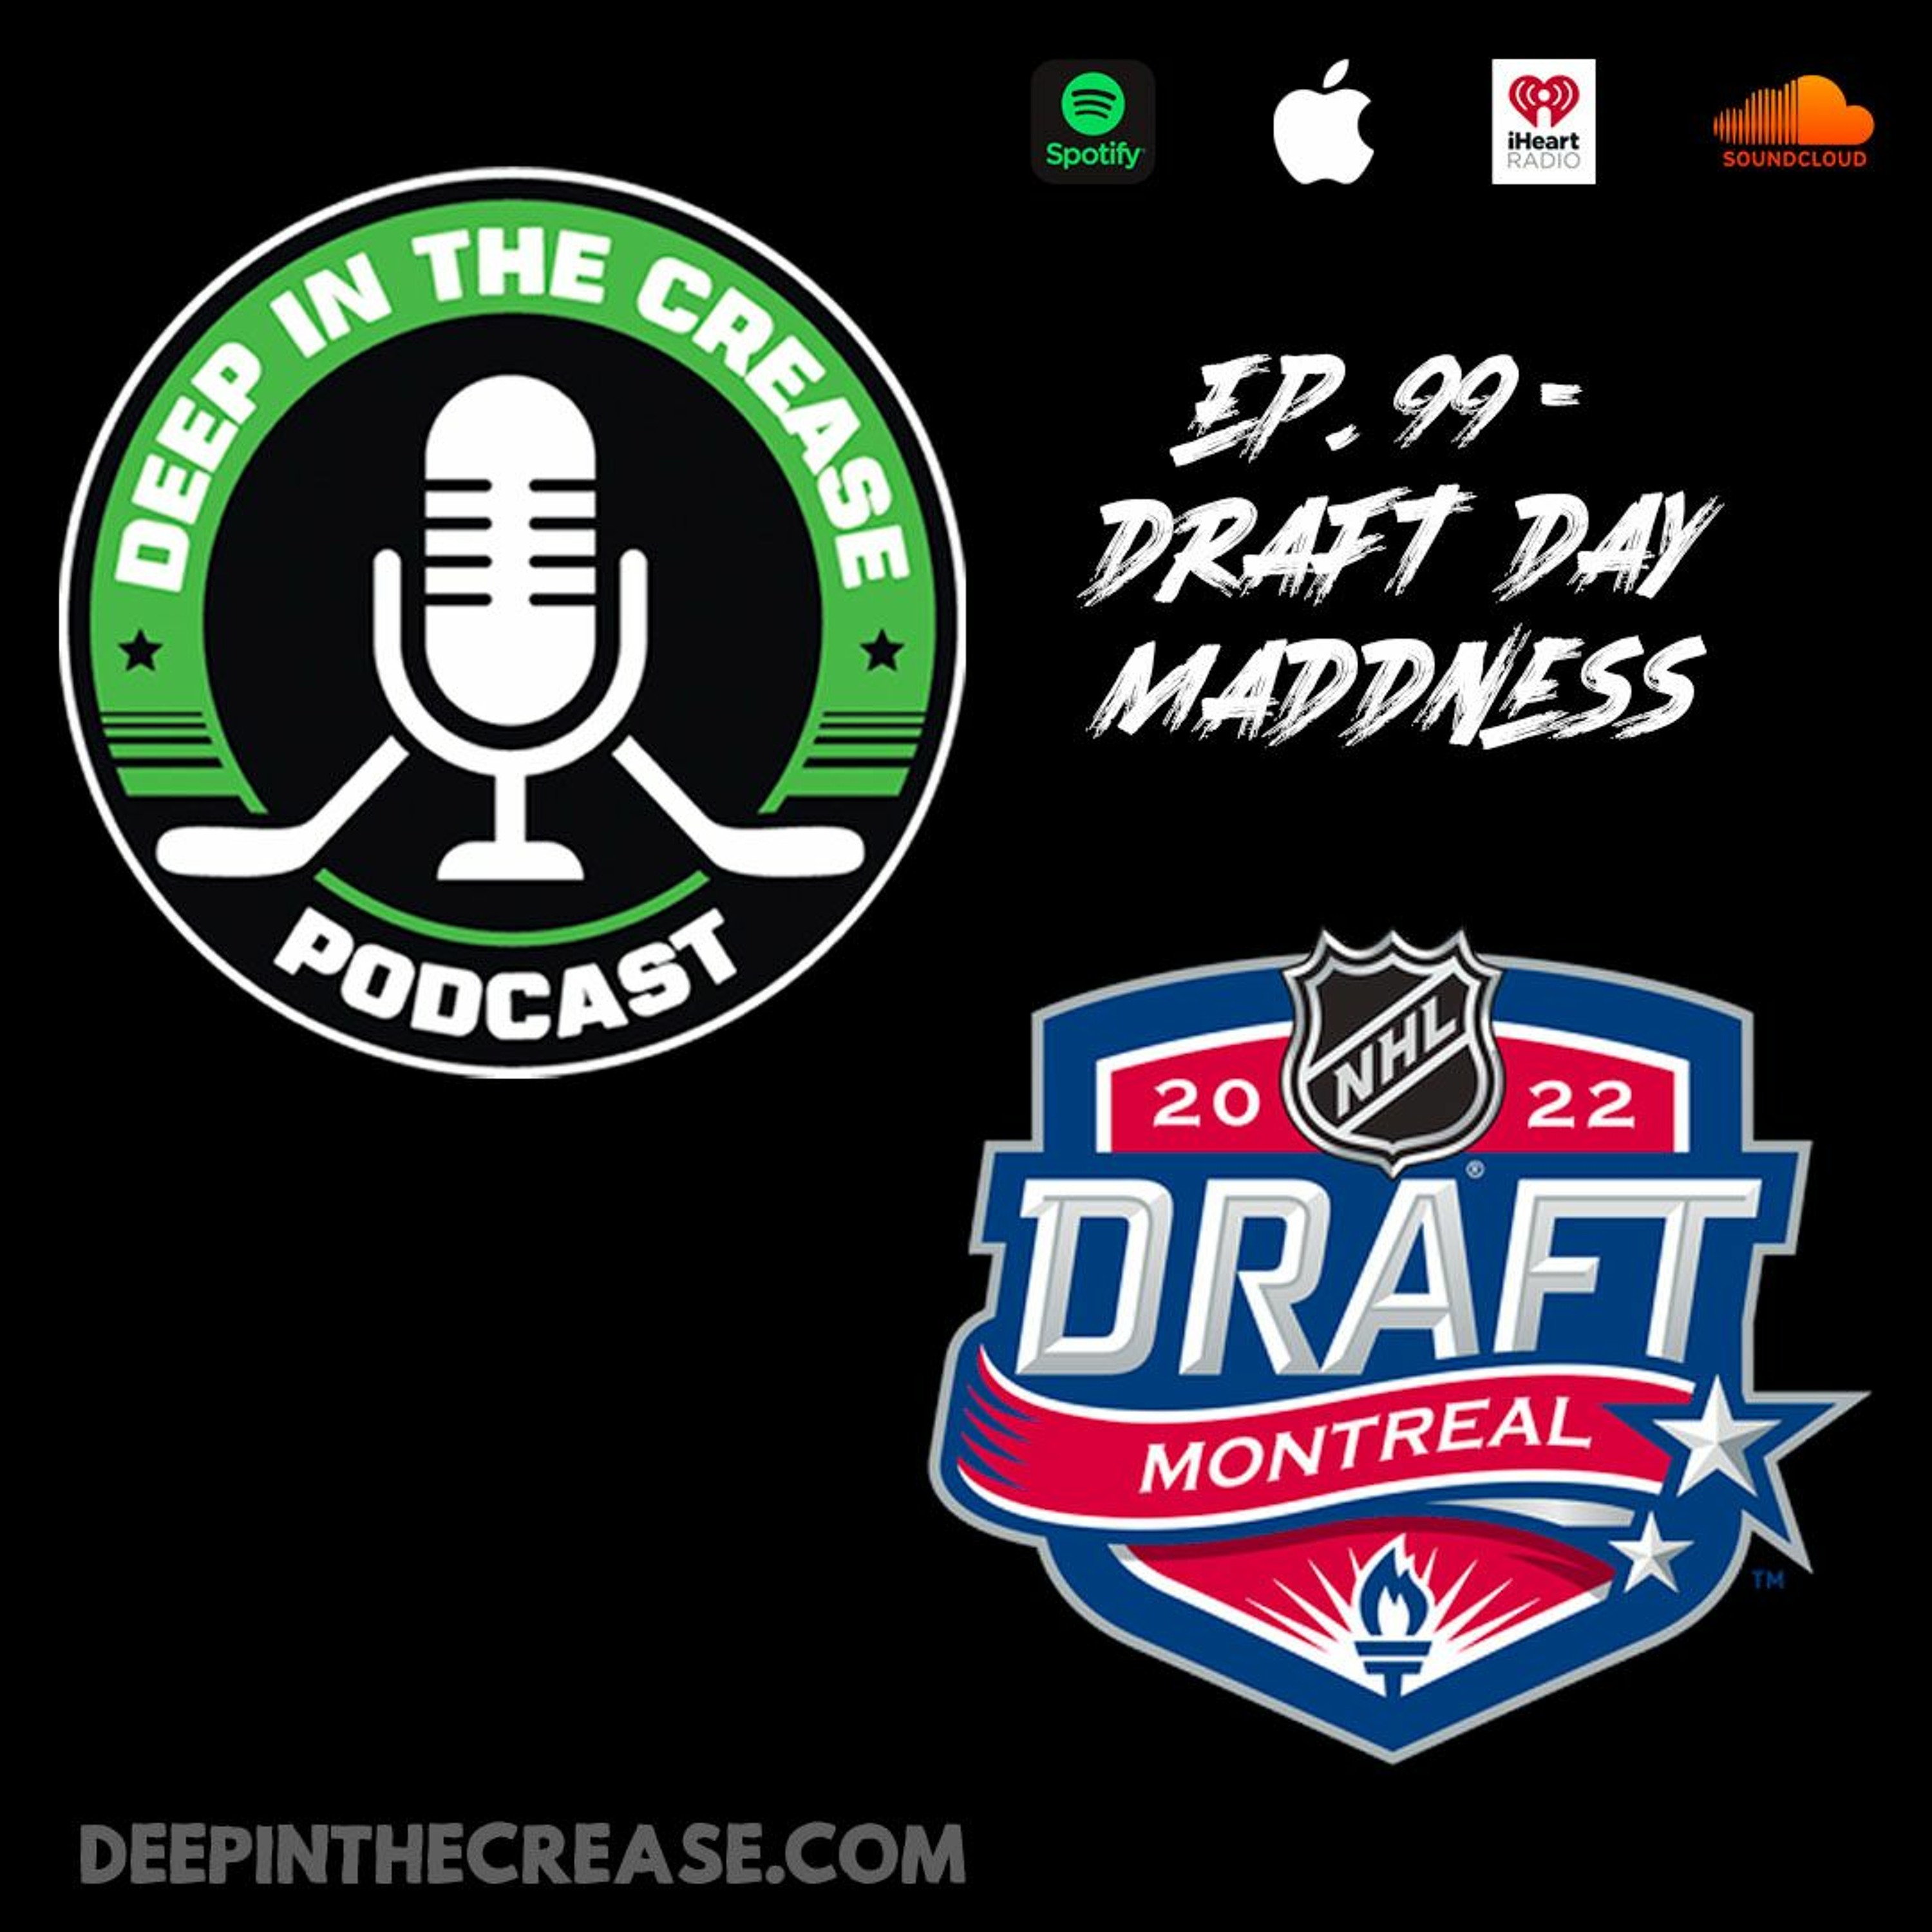 Episode 99 - Draft Day Madness Image